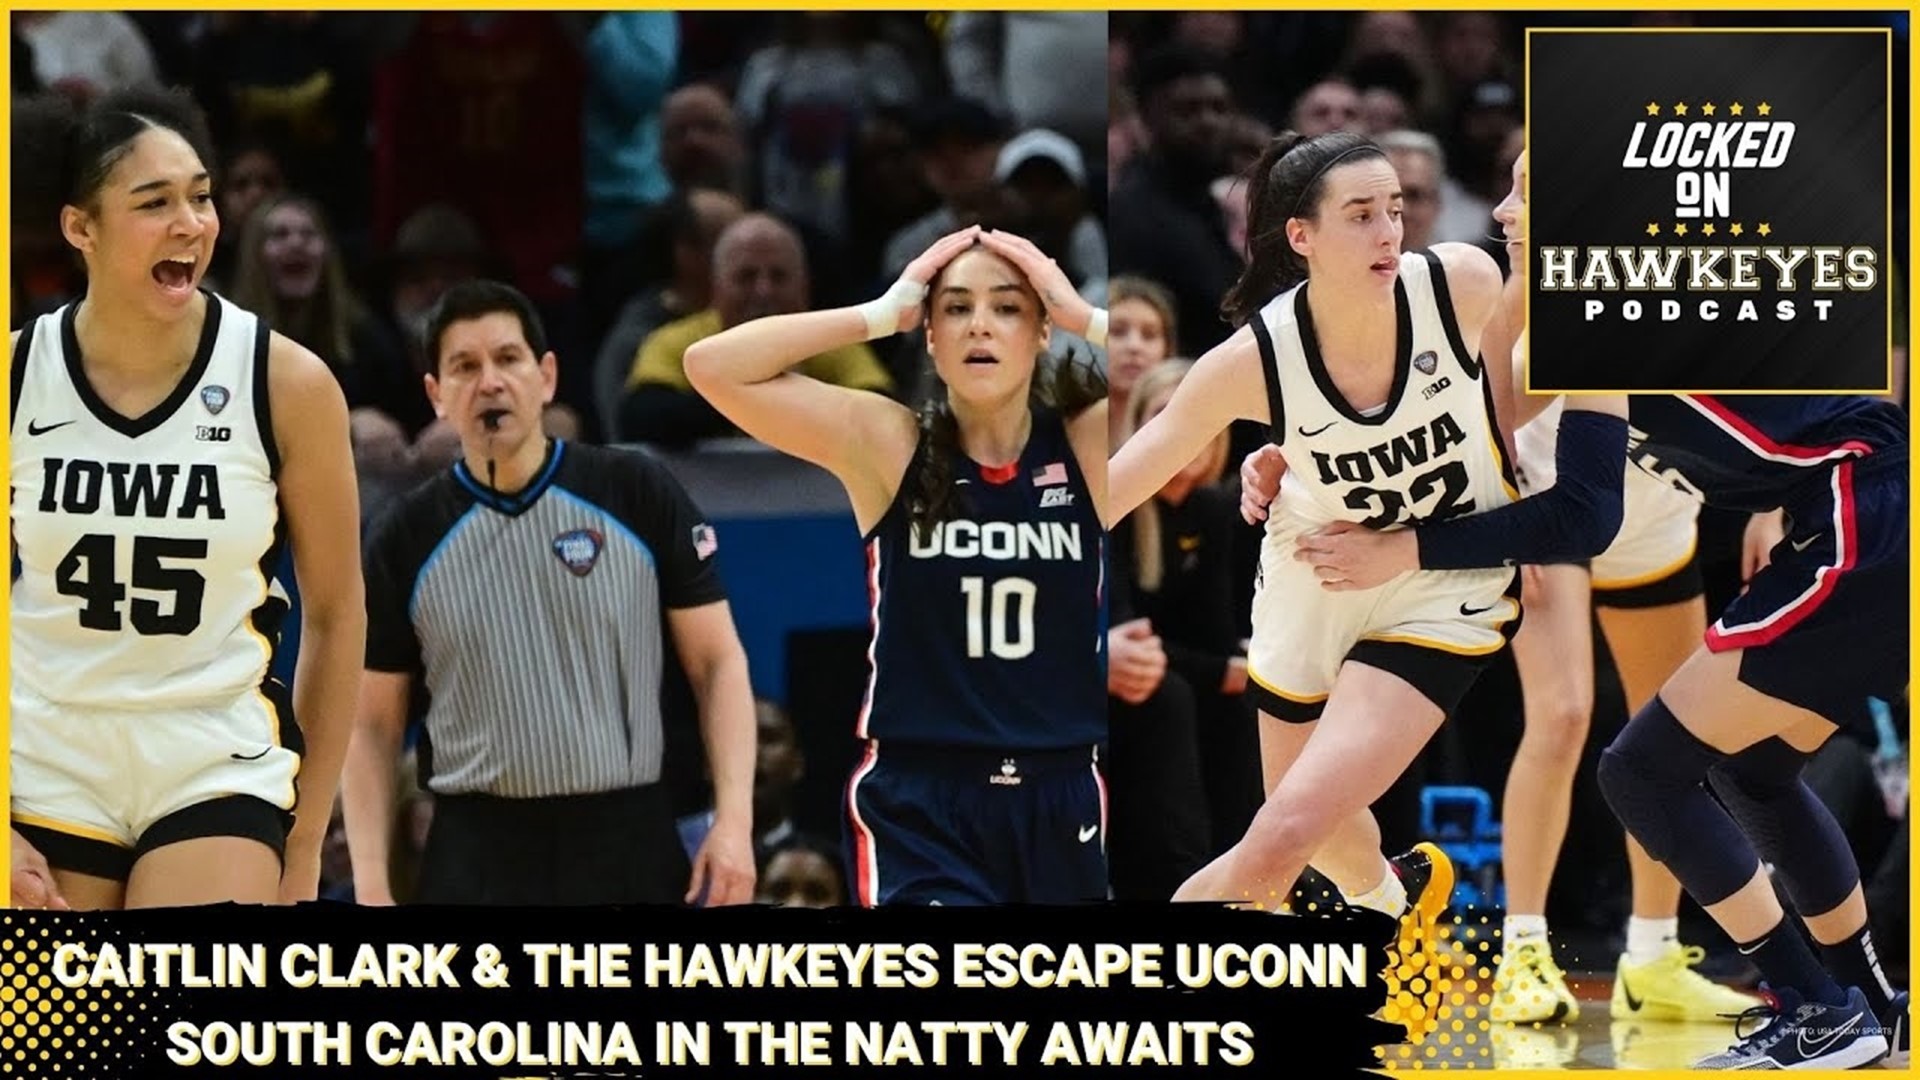 Trent Condon returns for an instant reaction podcast after the Hawkeyes advance past UConn 71-69 and move on to  the National Championship game.